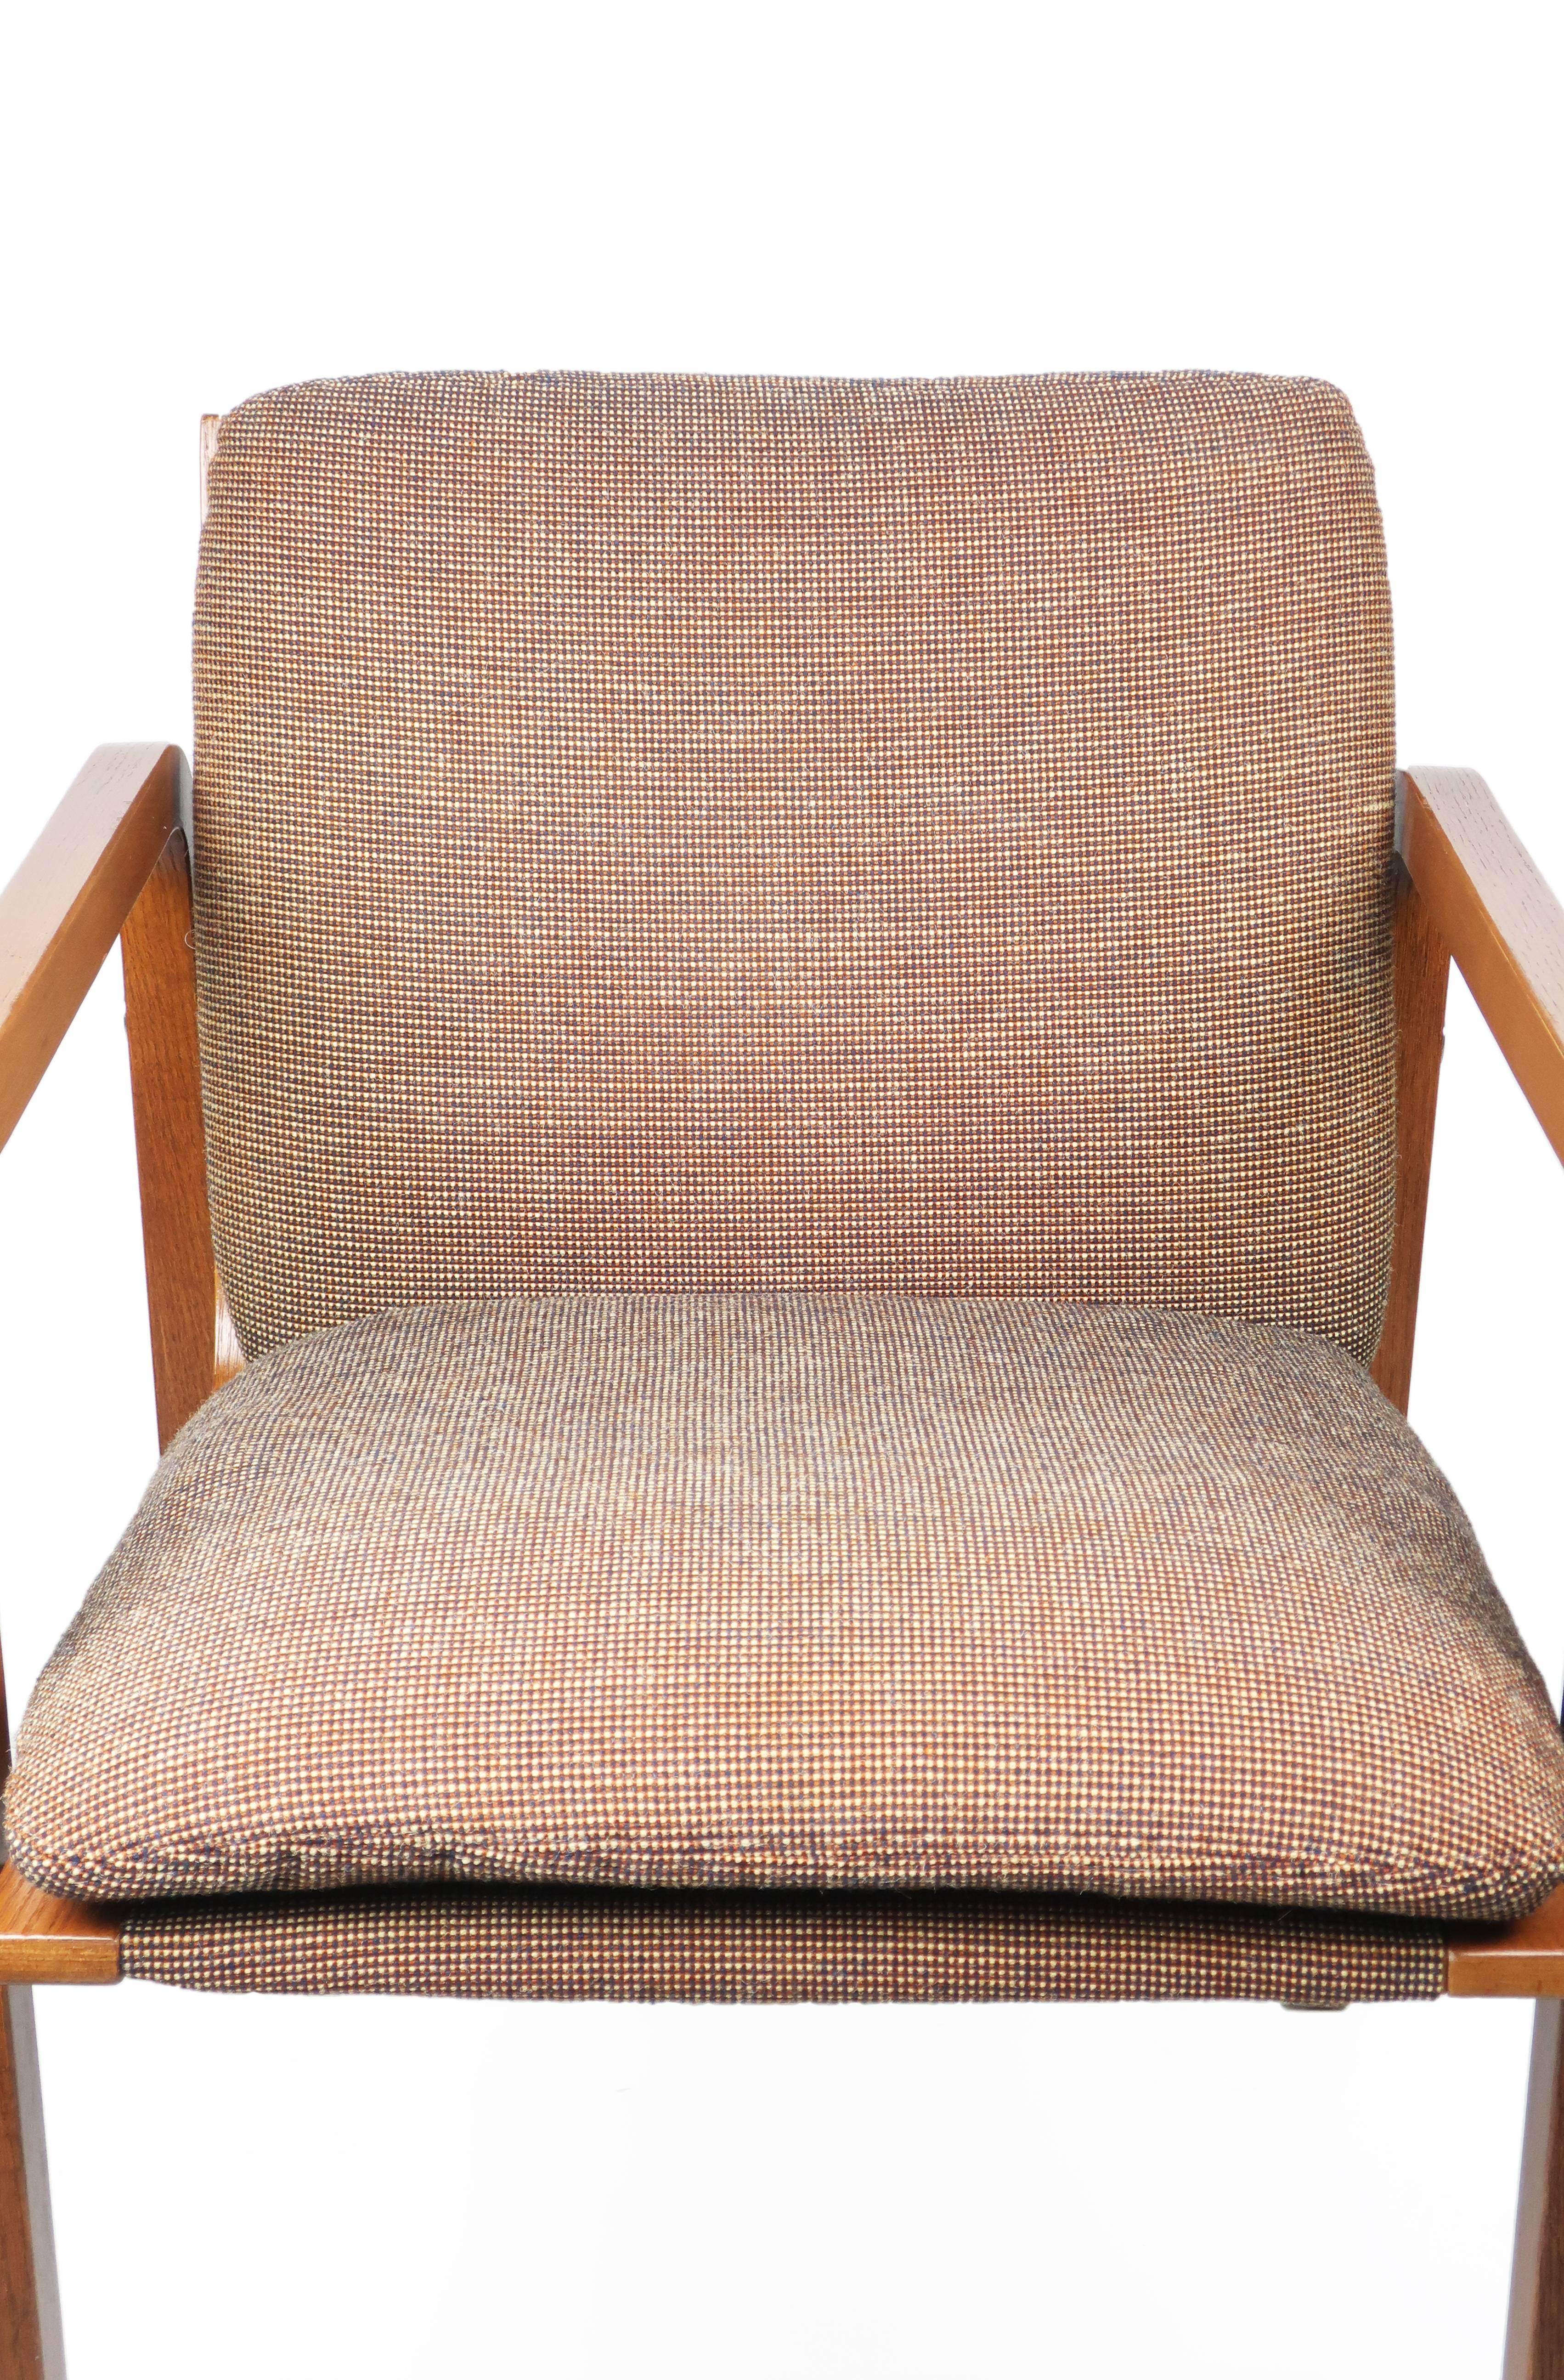 A Mid-Century Modern upholstered bentwood armchair by Thonet. Retains the original light brown wool upholstery on a beautiful oak frame with chrome accents. 

Seat cushion was recently reinforced to ensure many more years of comfortable sitting!